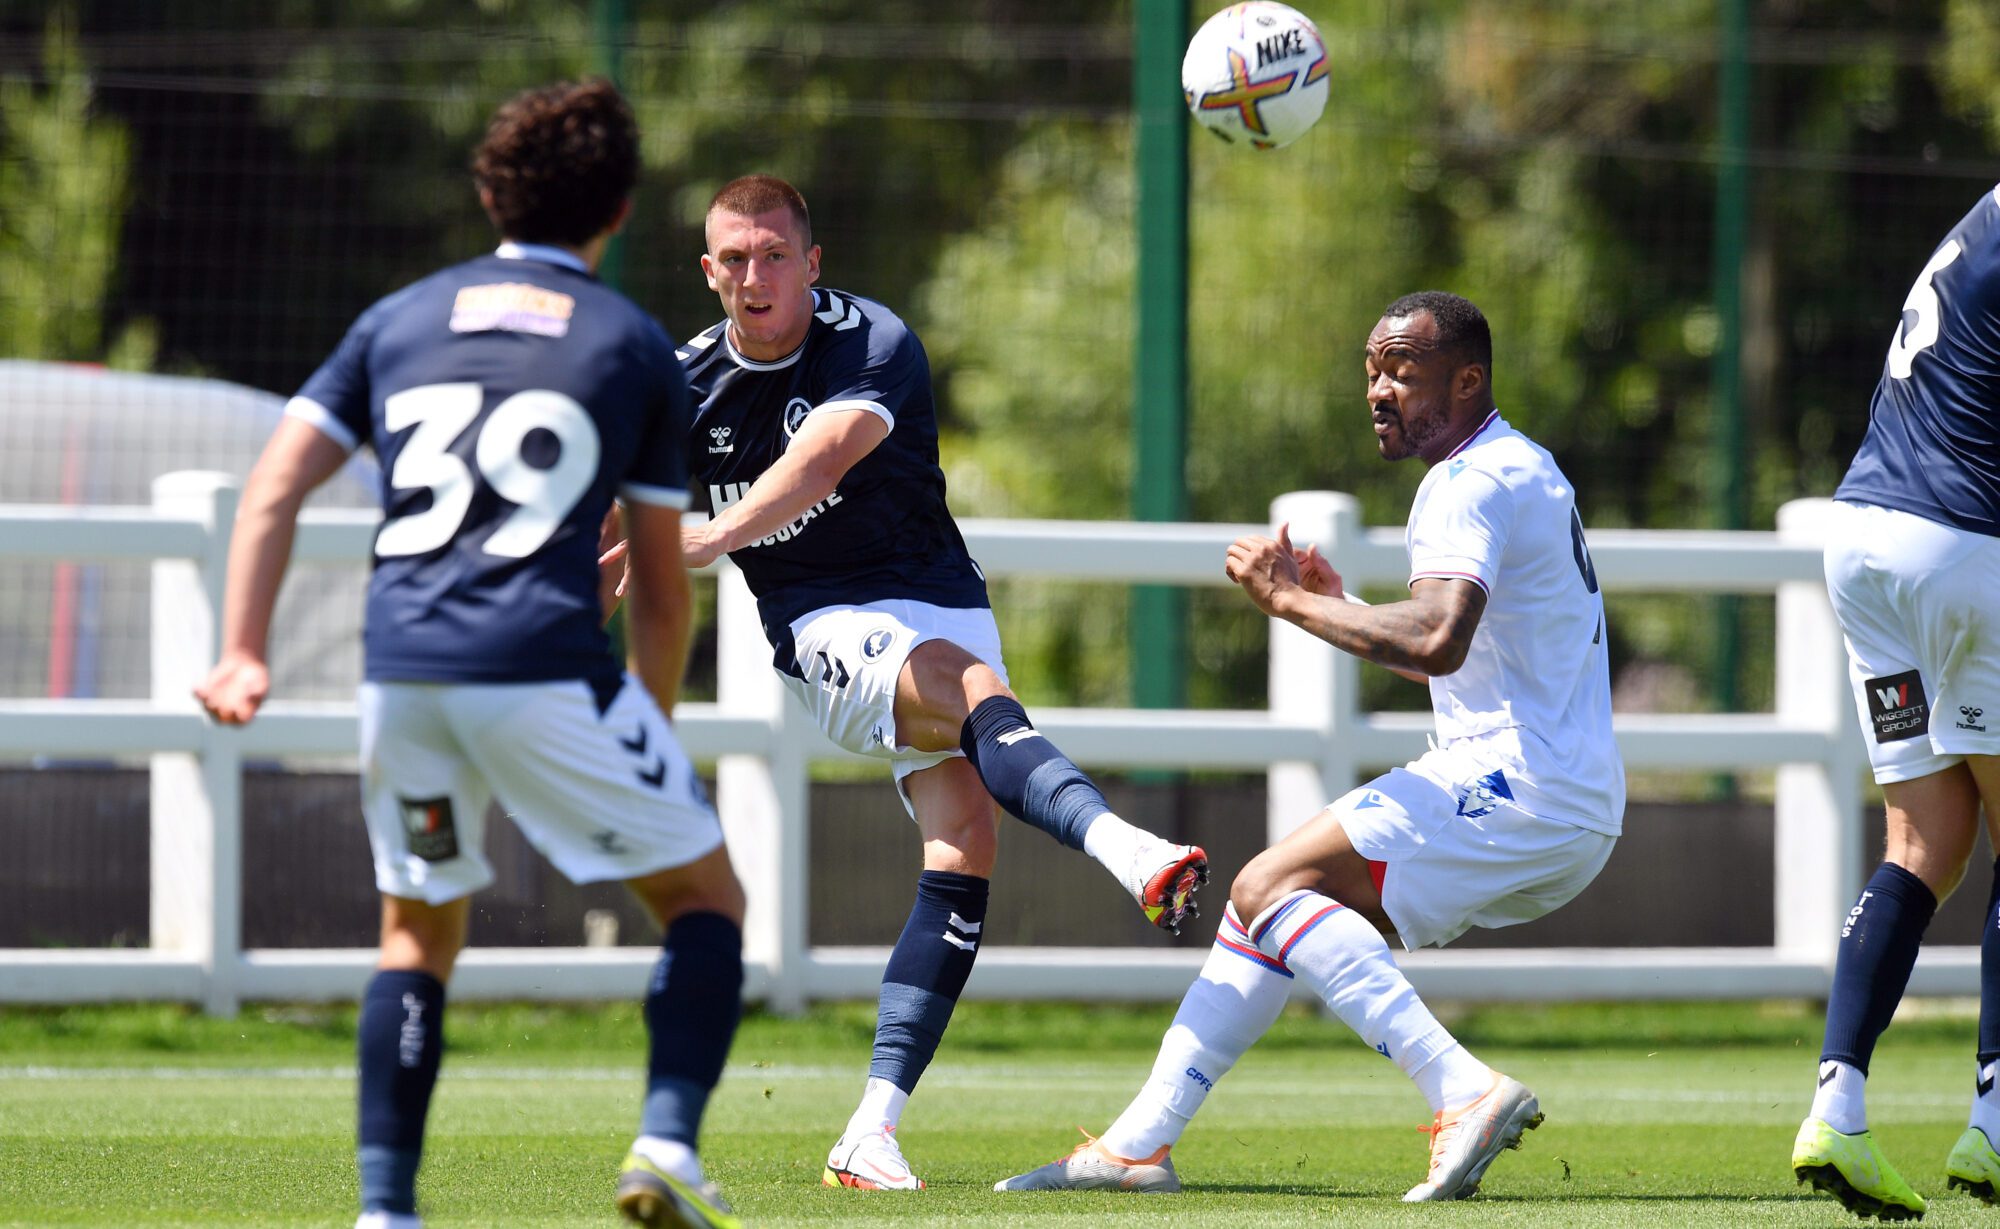 Millwall defender set for loan exit – South London News